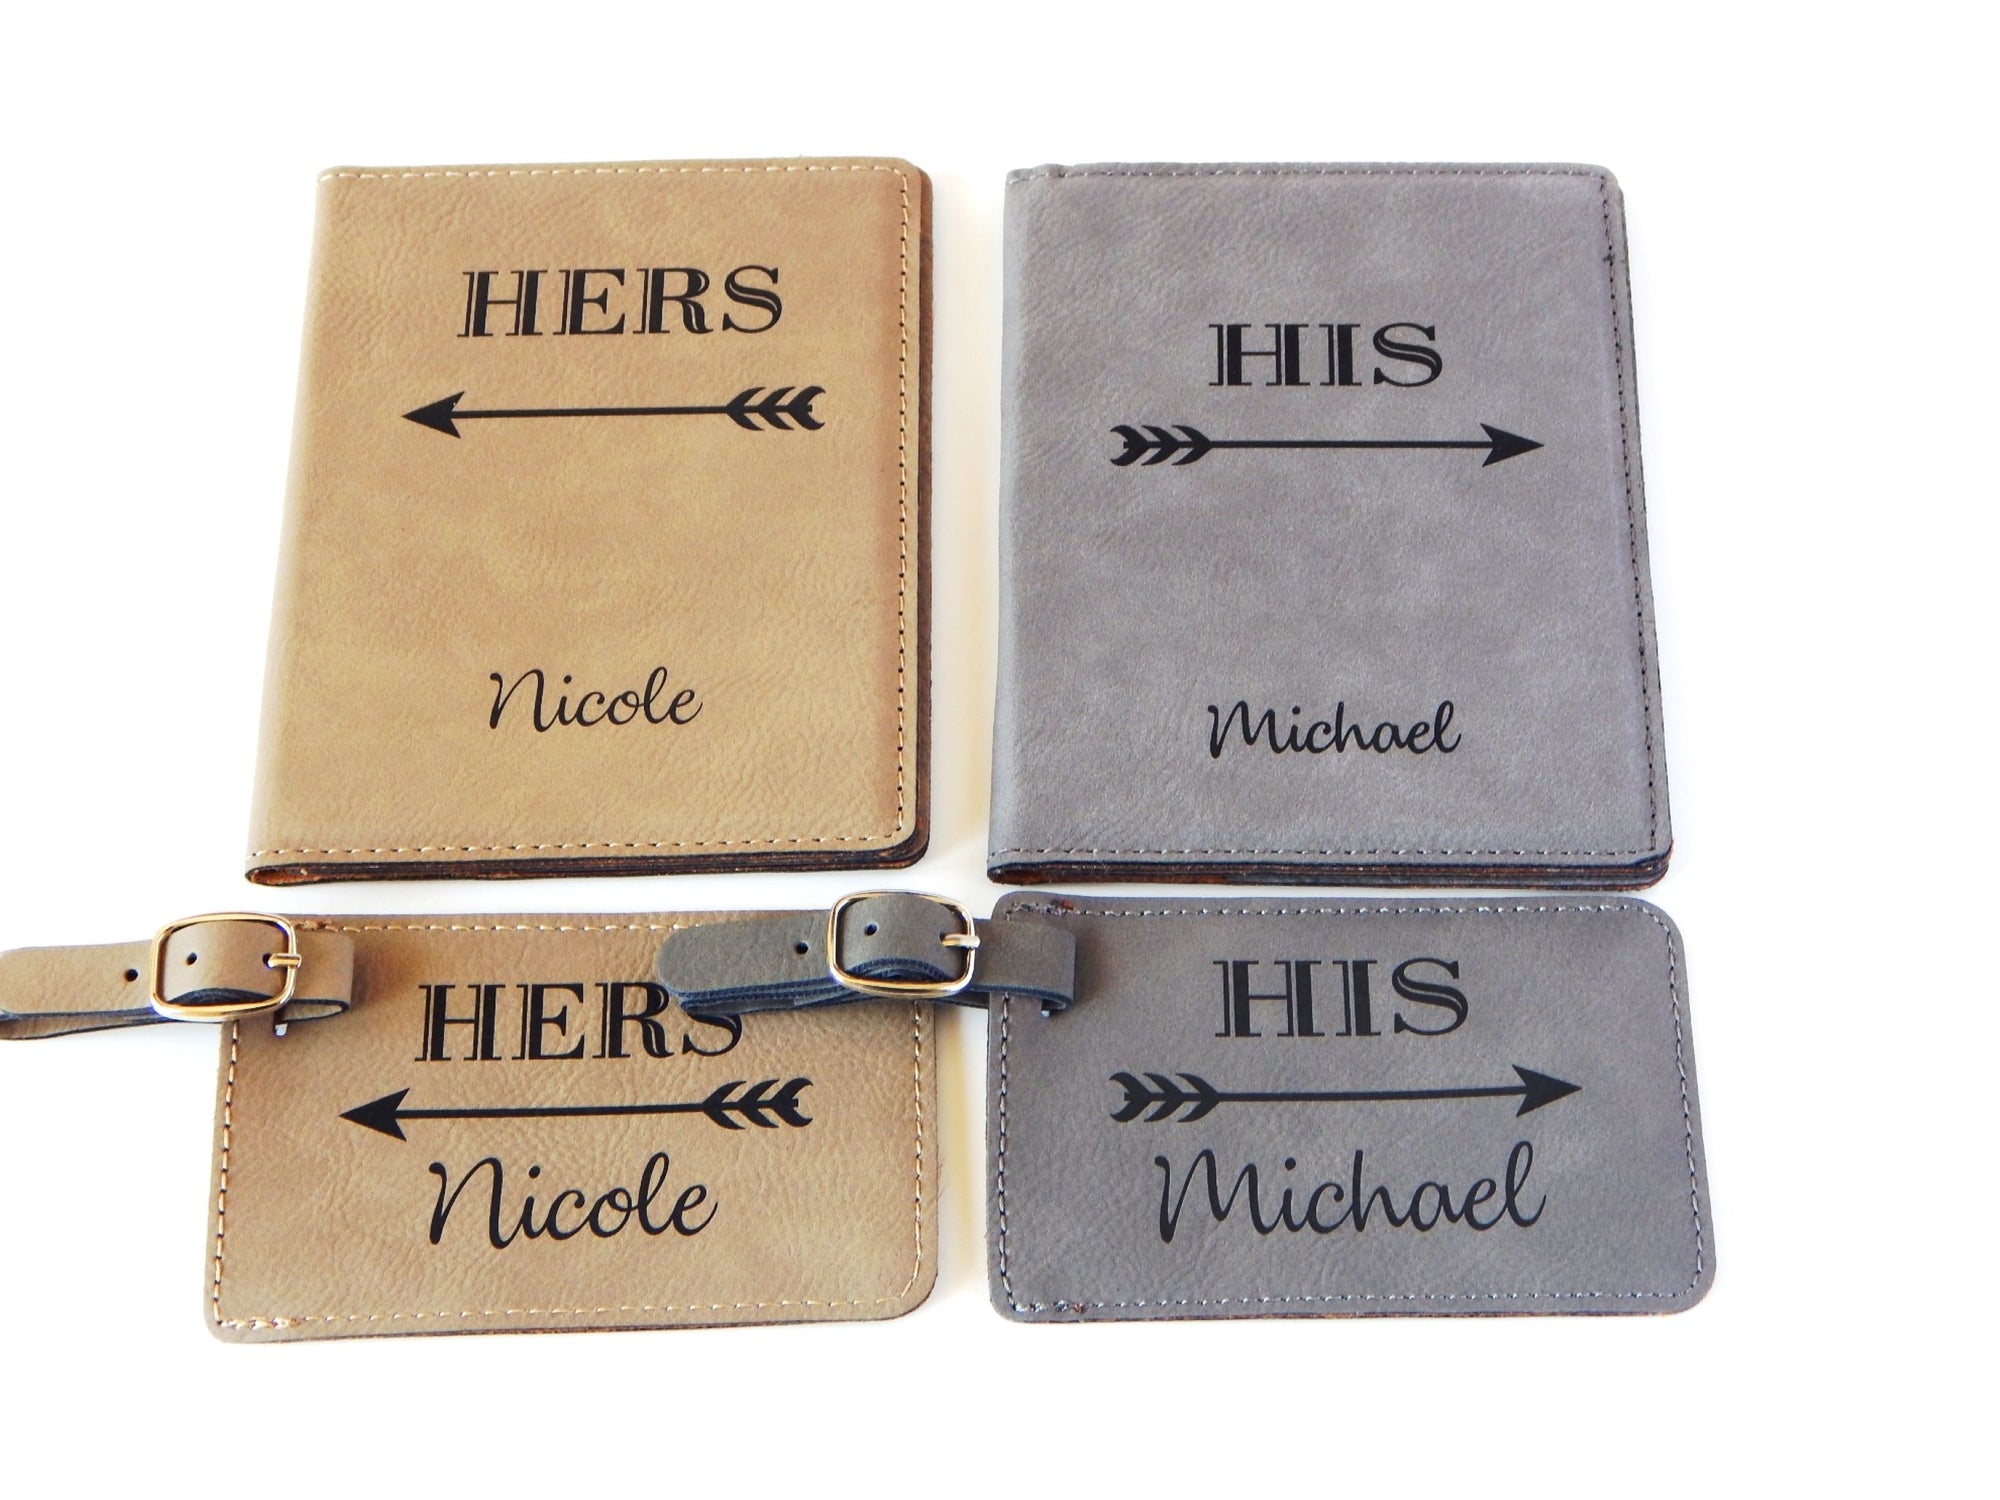 Mr. and Mrs. Personalized Passport Covers | Travel Gift Set for Couple